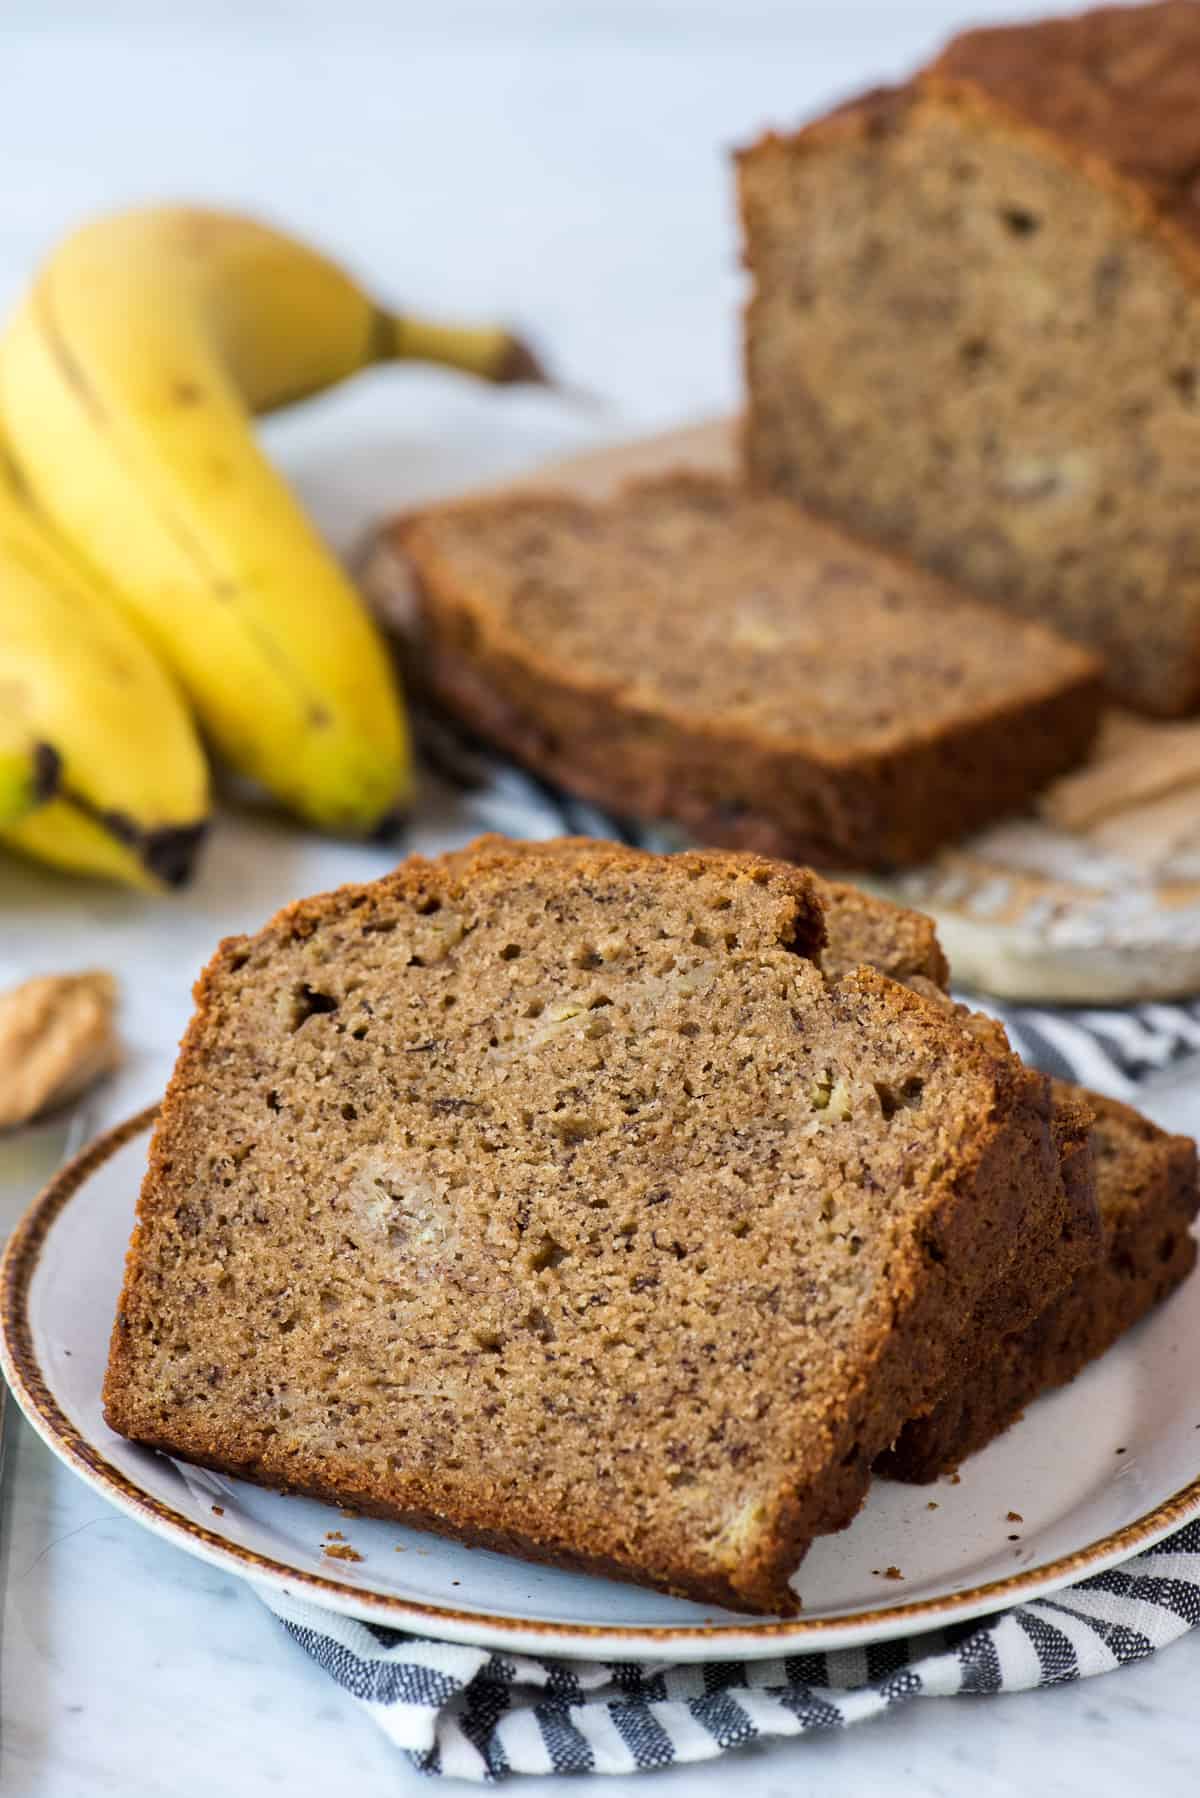 peanut butter banana bread on white plate with striped blue napkin